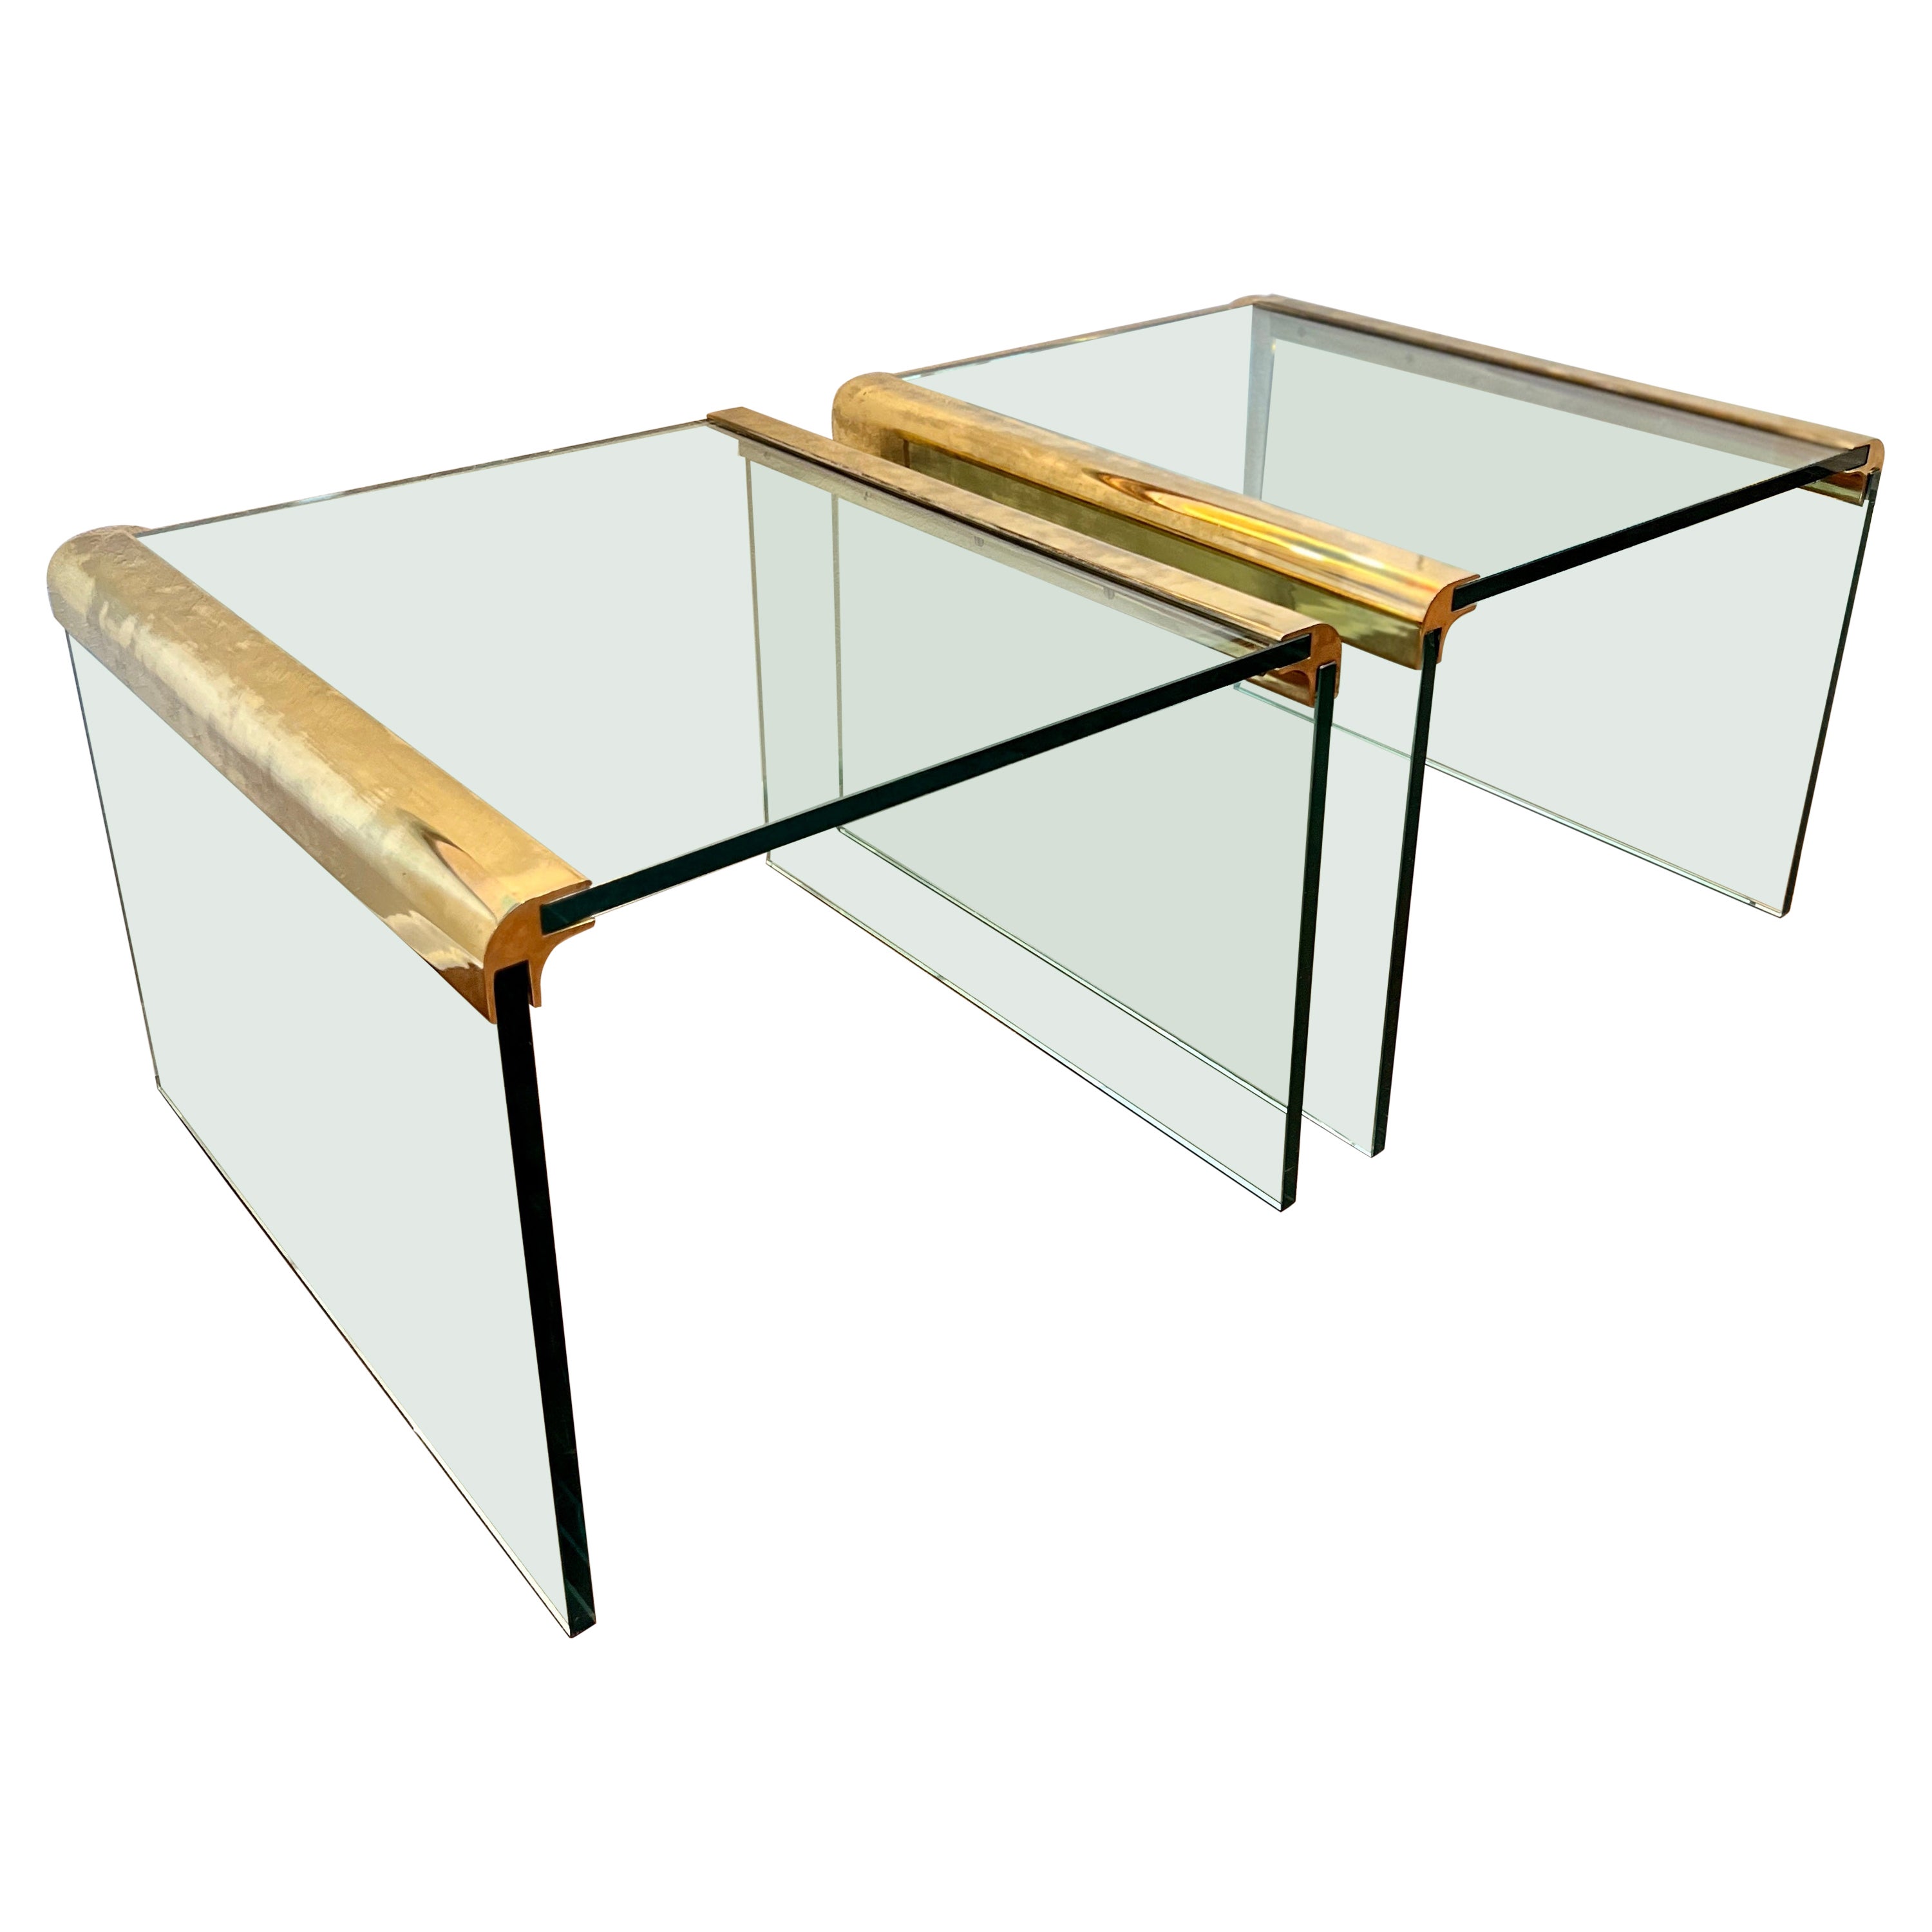 Set of Waterfall End Tables by Leon Rosen for Pace Collection, circa 1970s